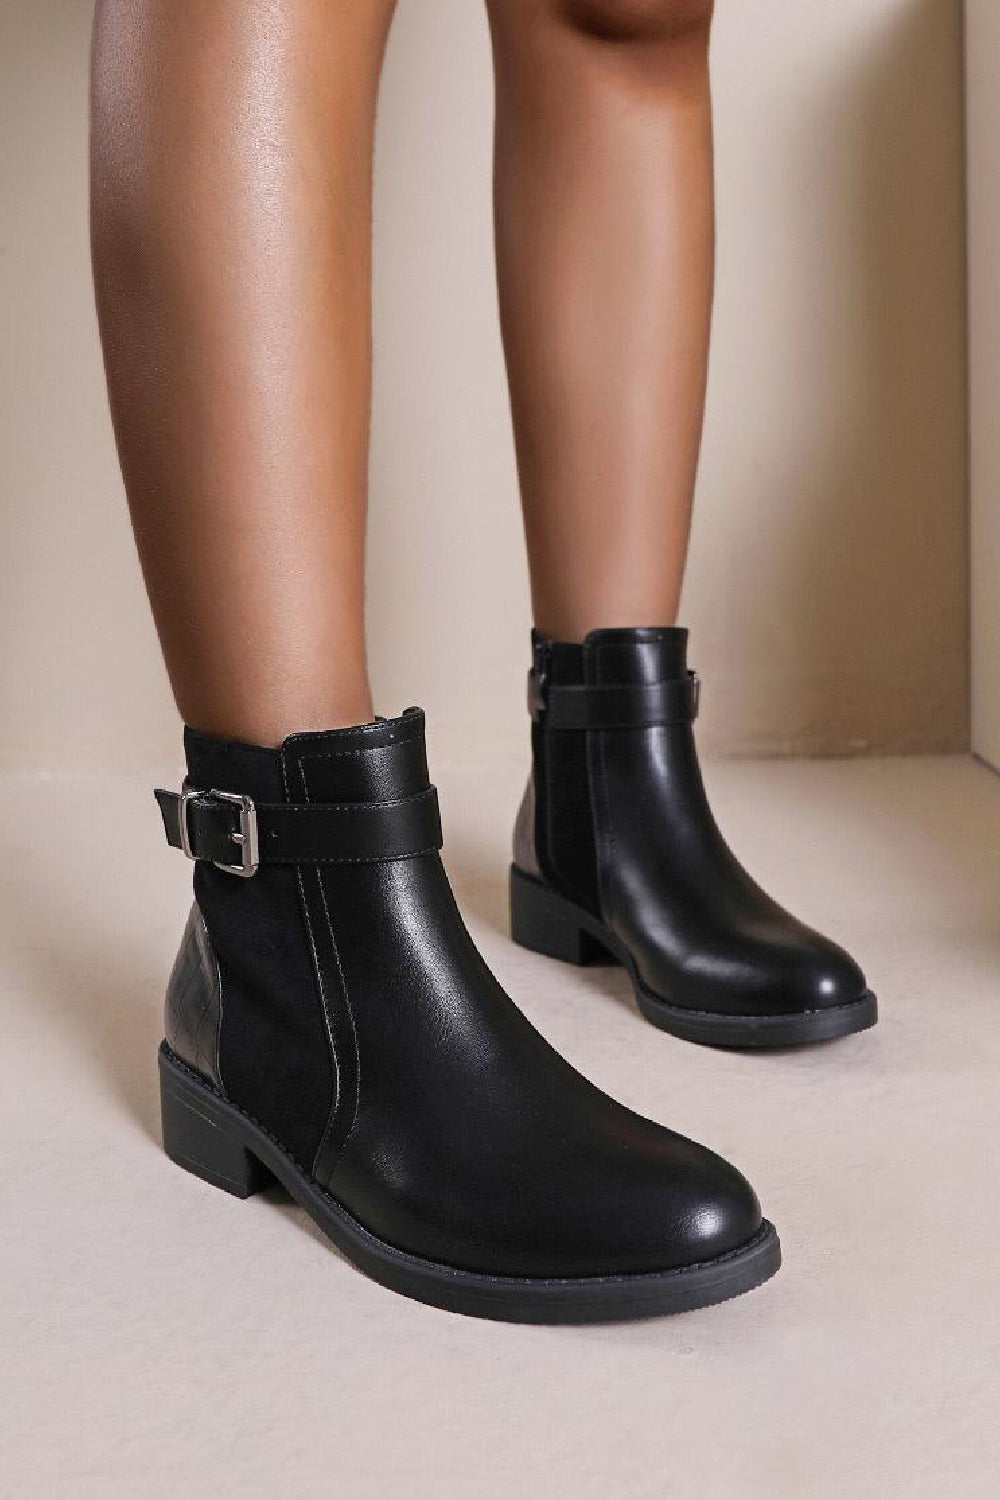 BLACK FLAT BUCKLE DEATIAL ANKLE BOOTS